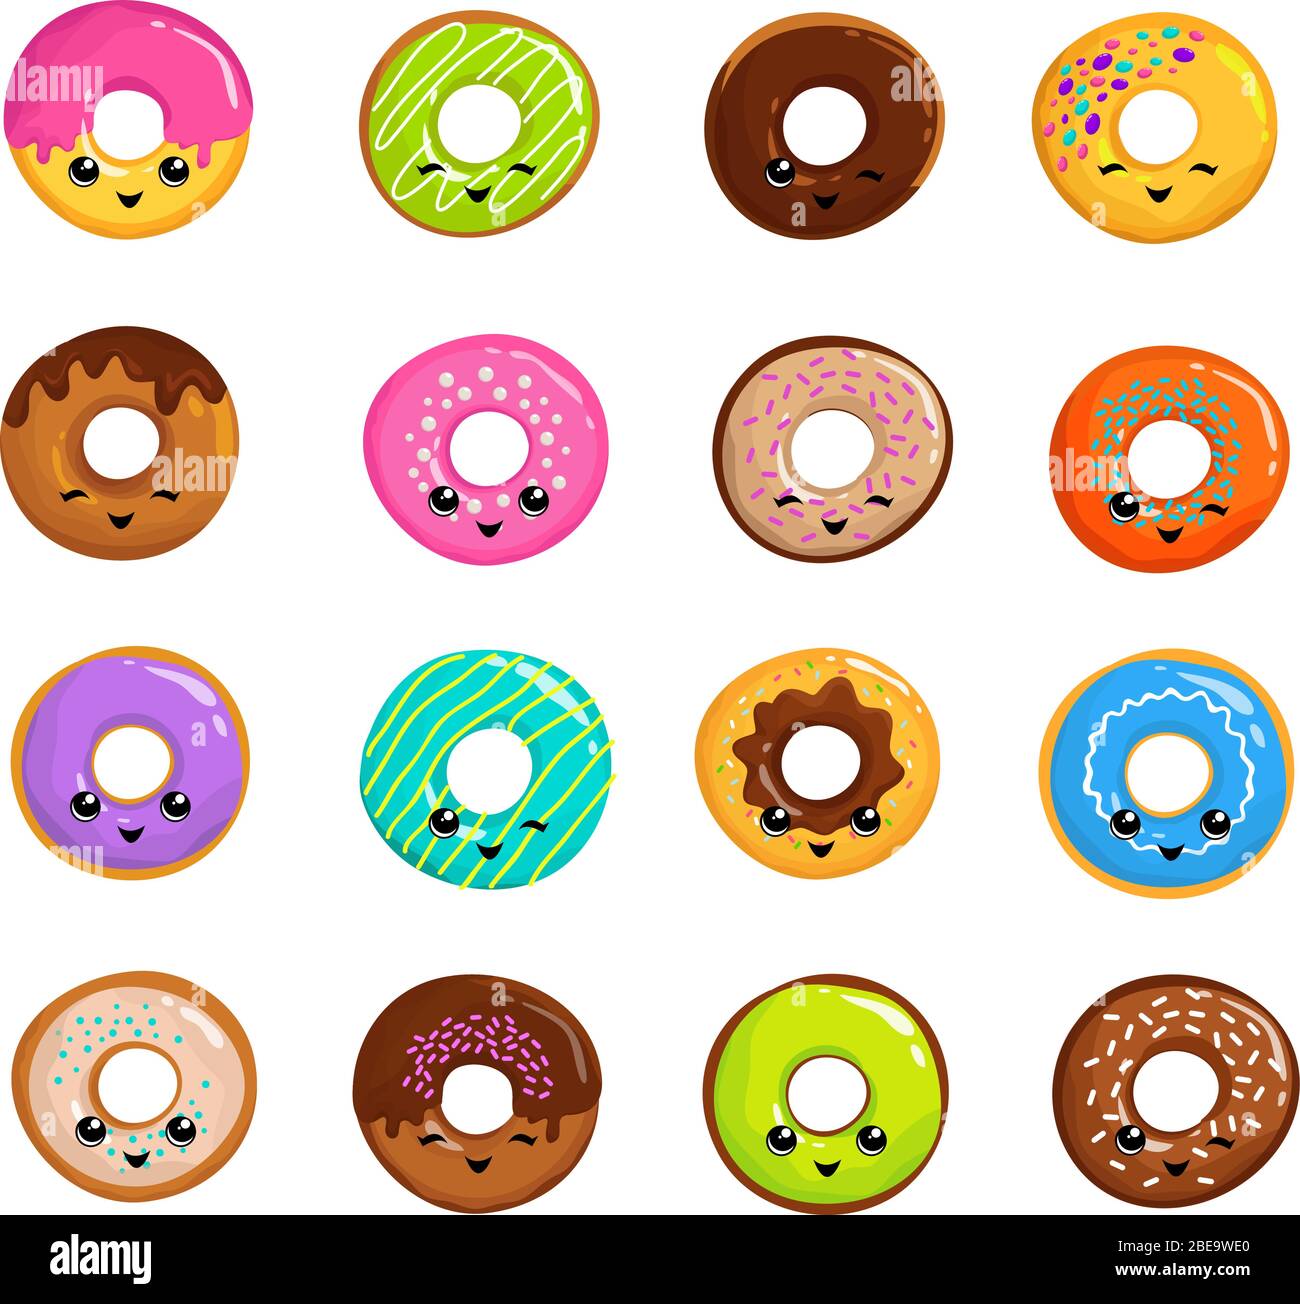 Cute sweets donuts in japanese kawaii style vector set. Donut food sweet, delicious tasty cream pastry illustration Stock Vector